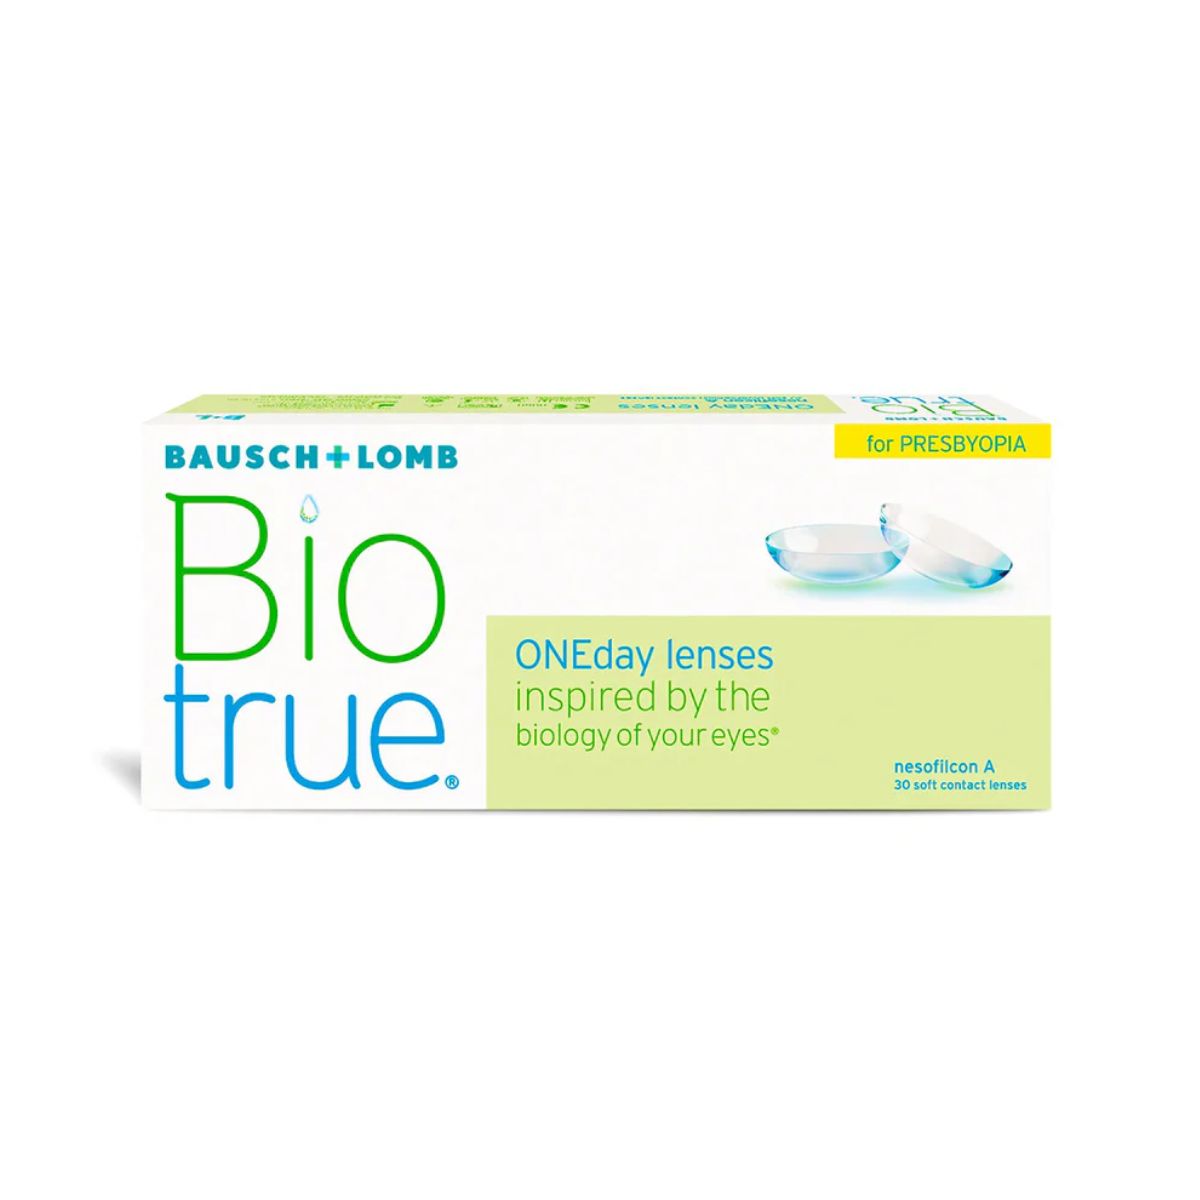 "Bausch & Lomb BioTrue One Day For Presbyopia Contact Lenses optorium"